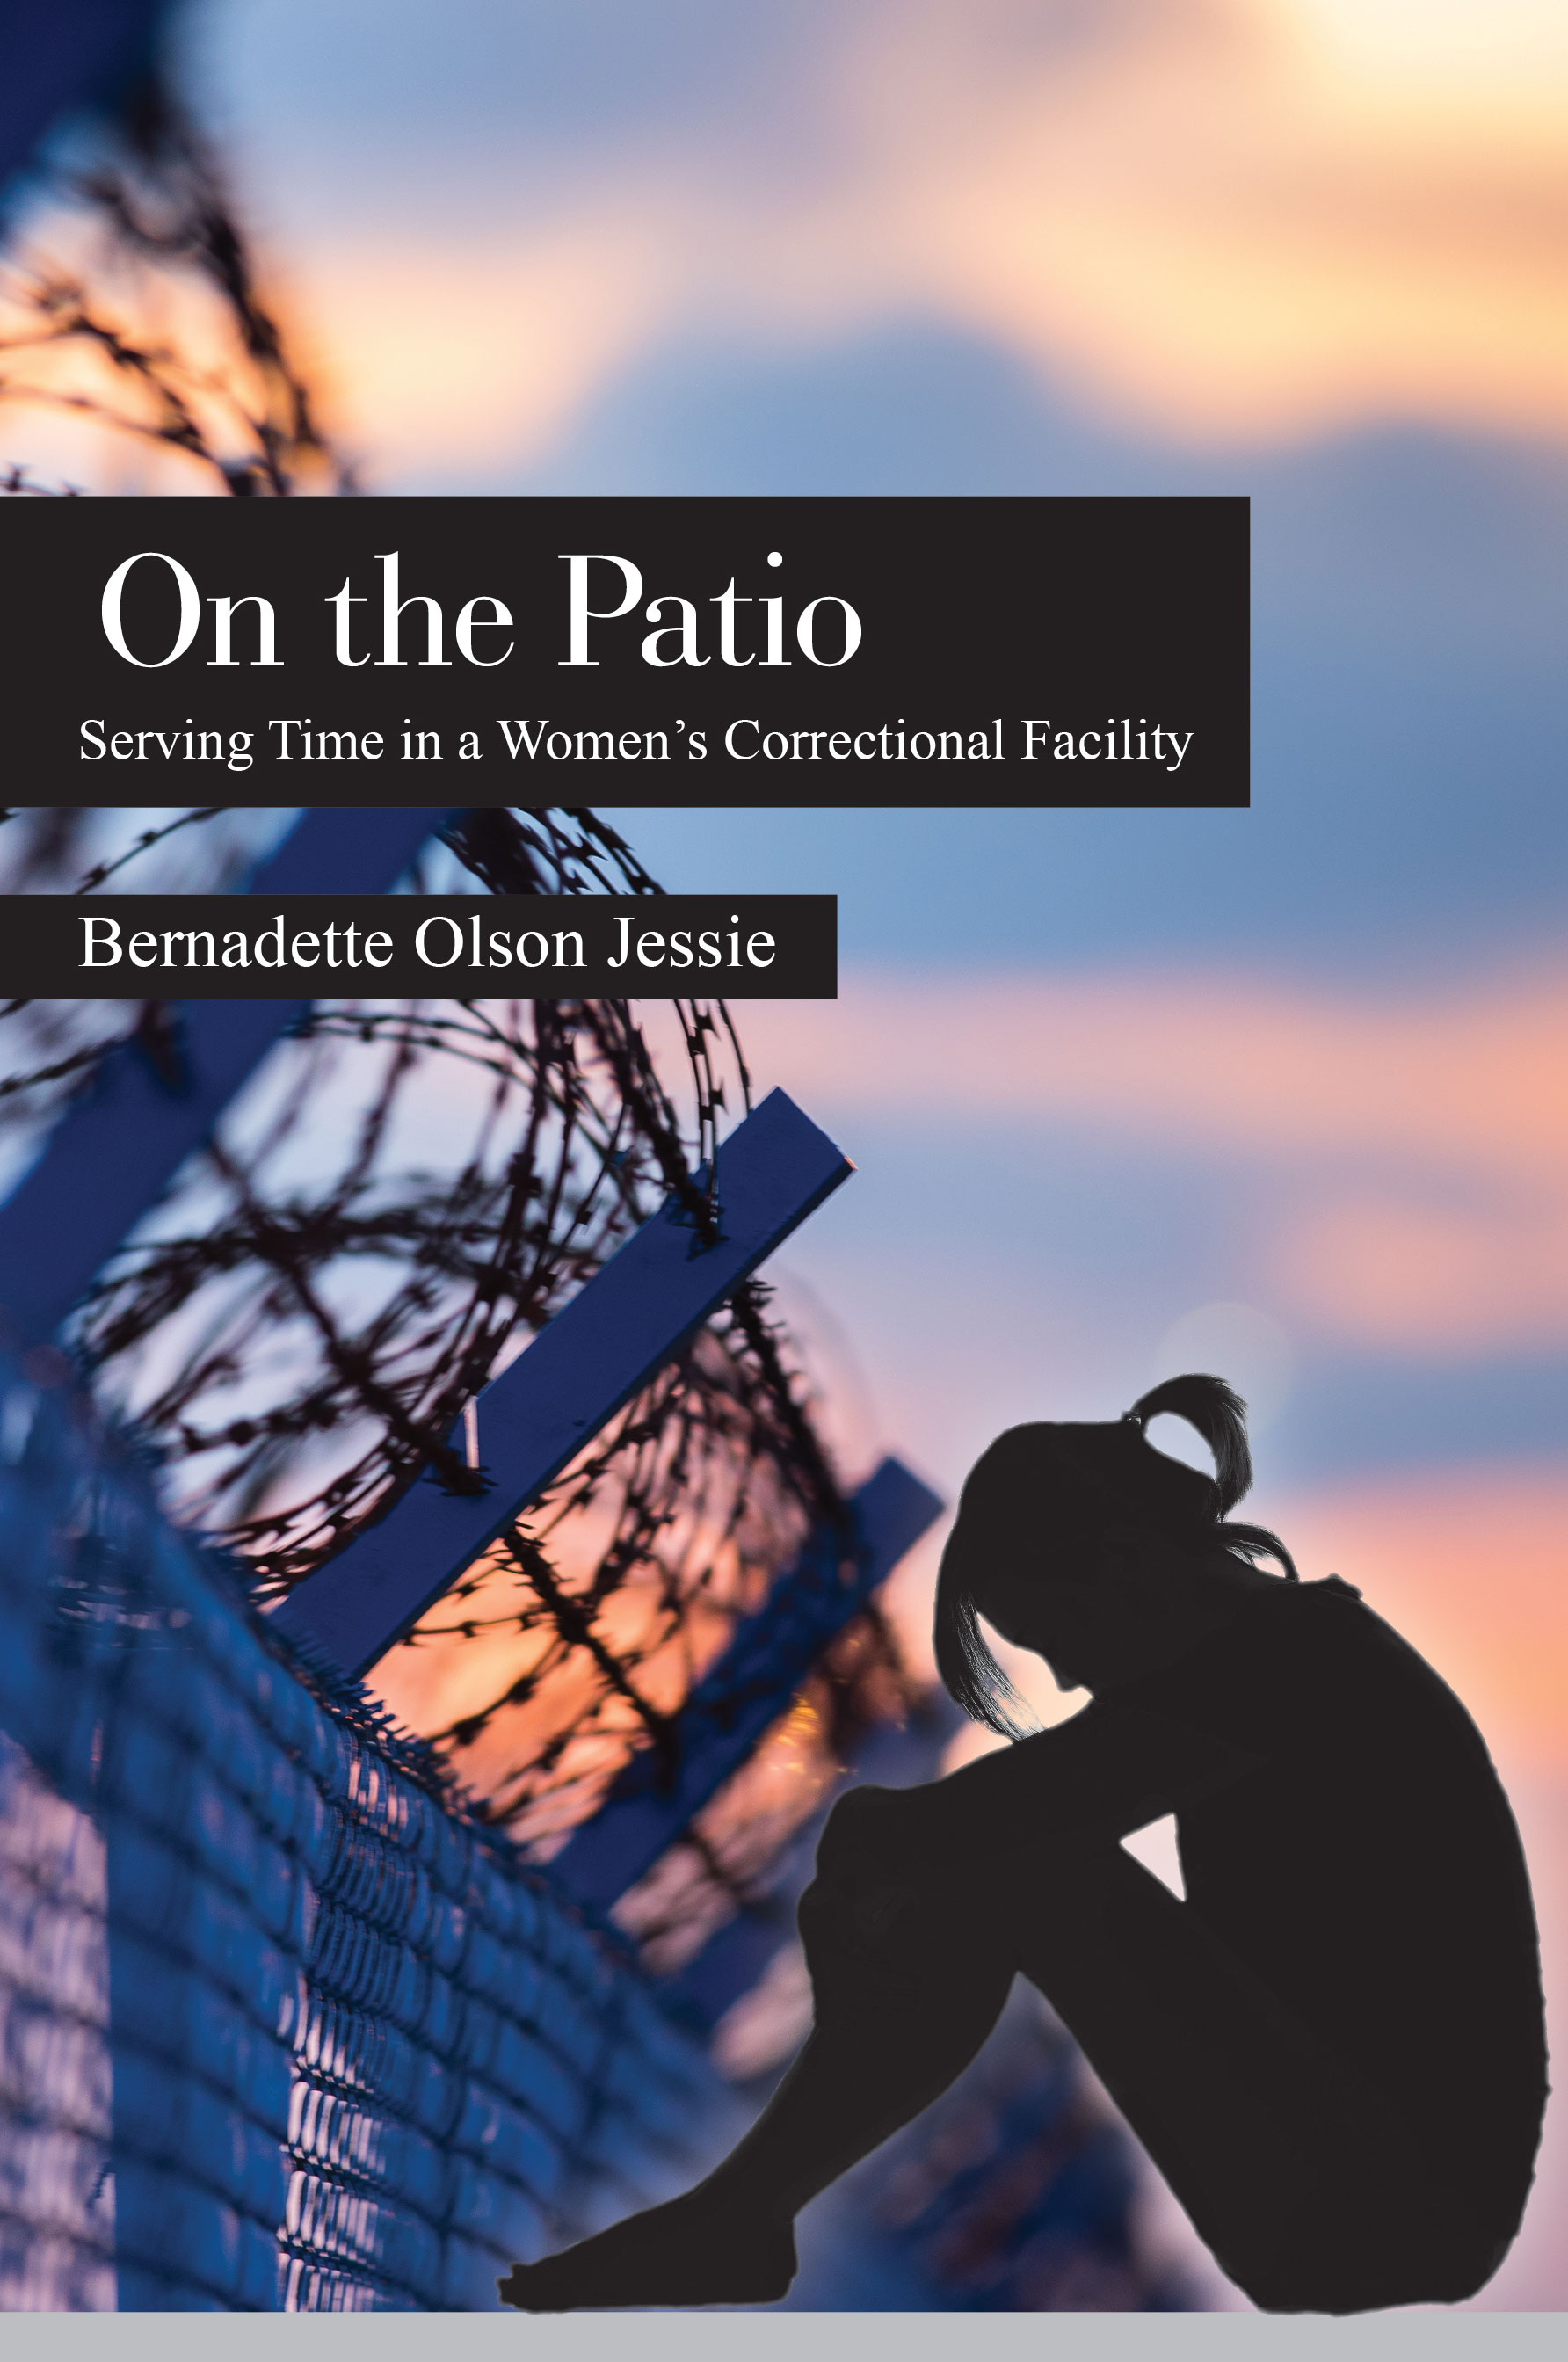 On the Patio: Serving Time in a Women